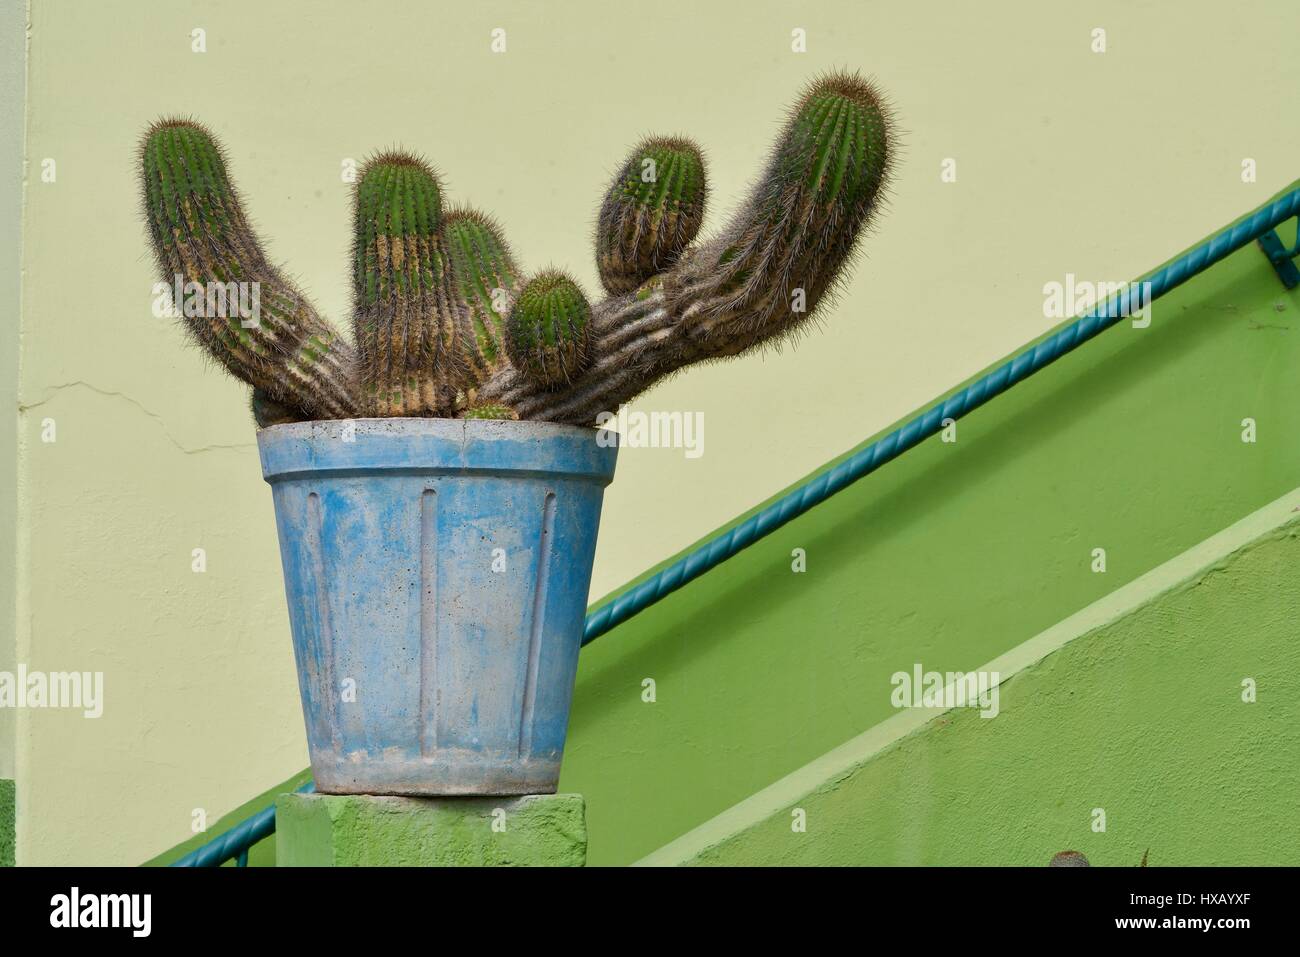 green cactus in a blue plant pot in front of a yellow-gren wall and a blue stair railing Stock Photo